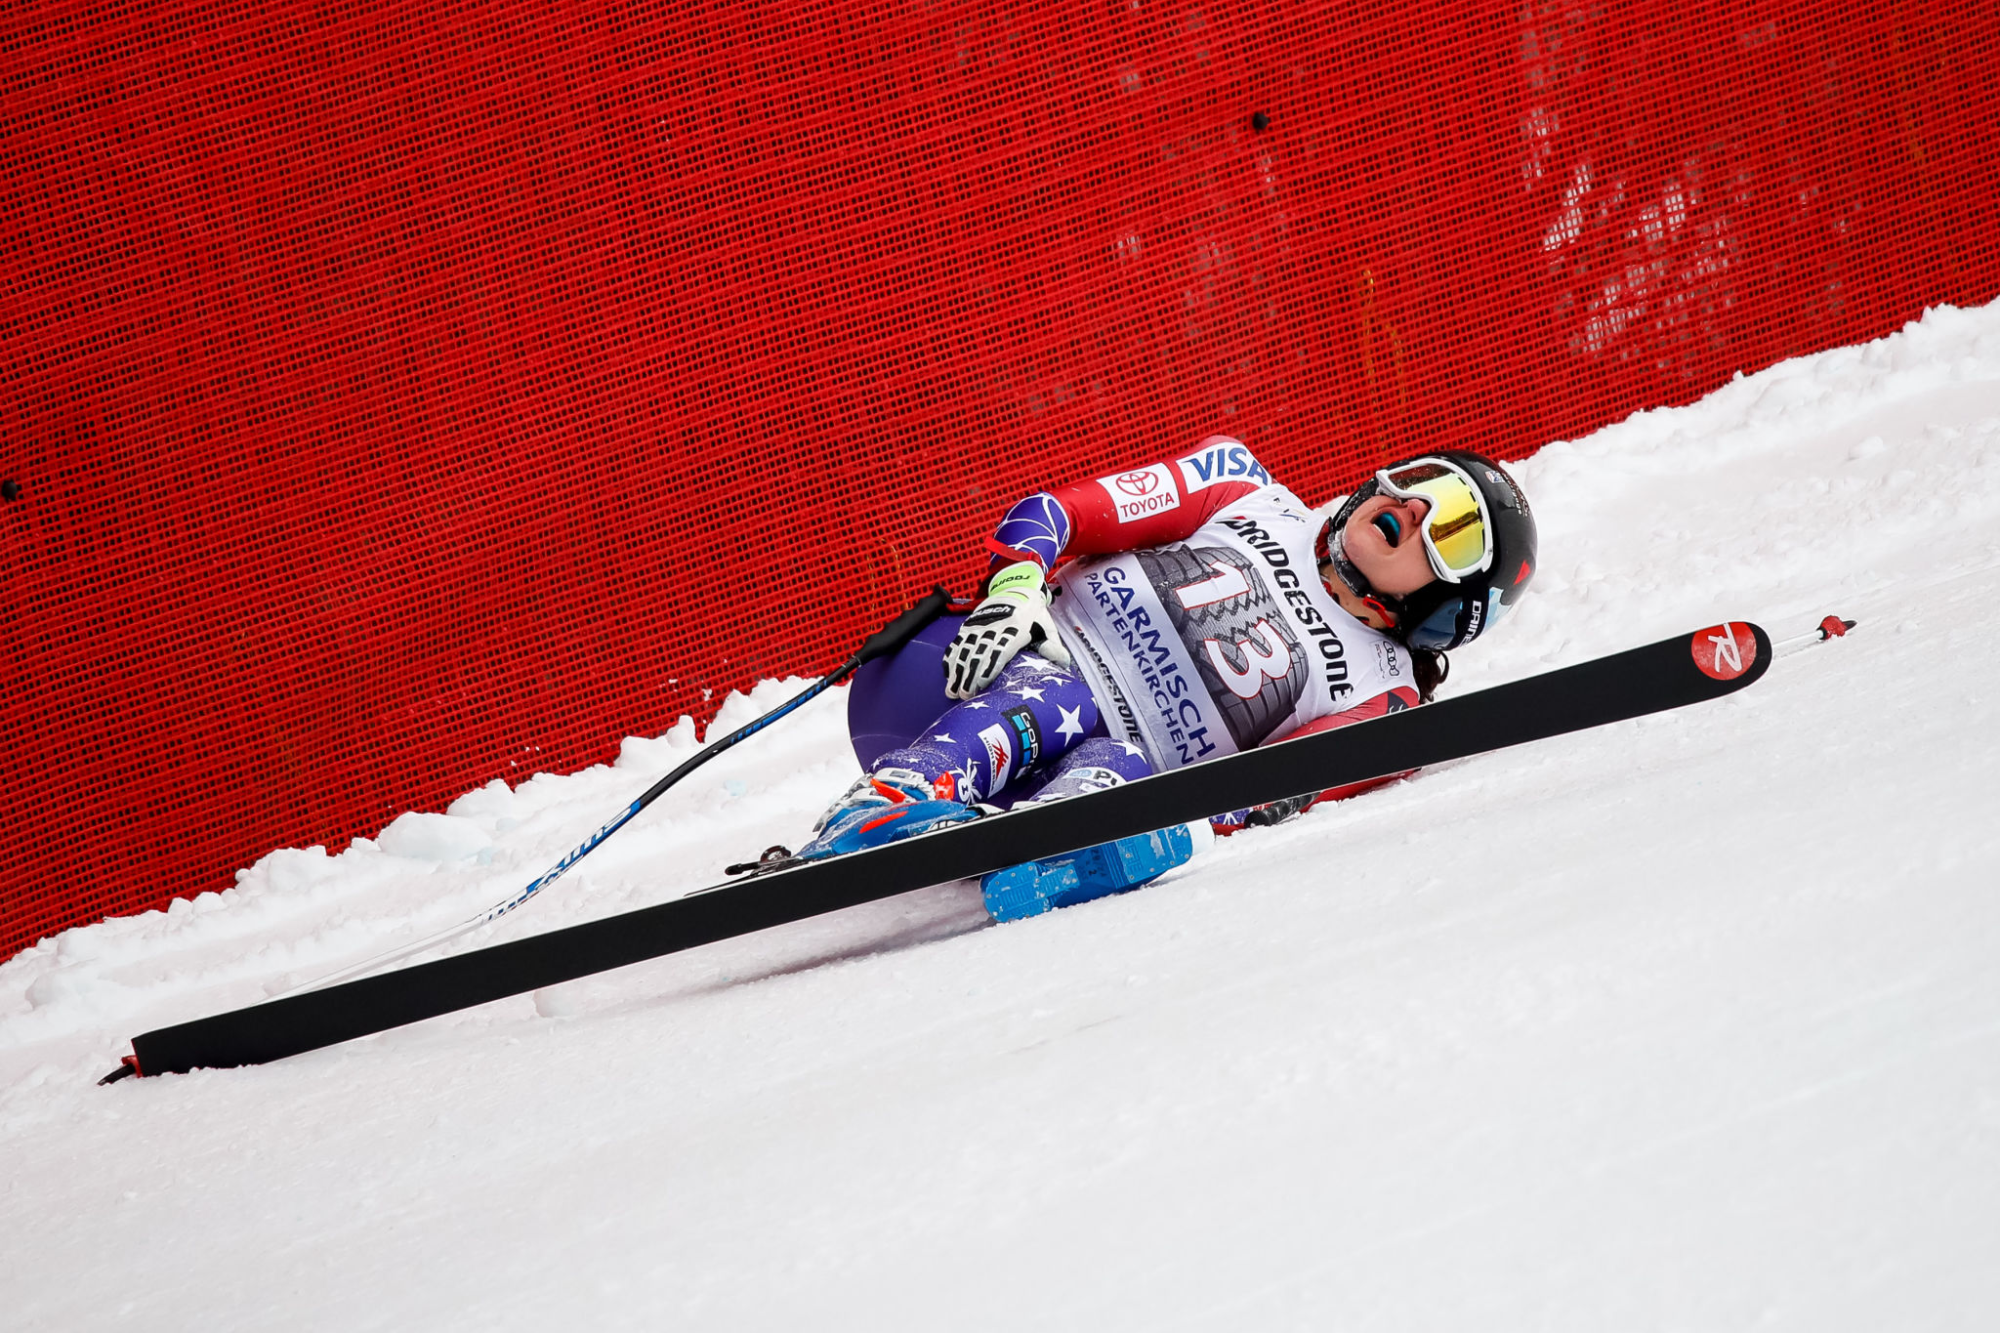 American skier Jackie Wiles clutches her leg after crashing in an FIS World Cup downhill race.